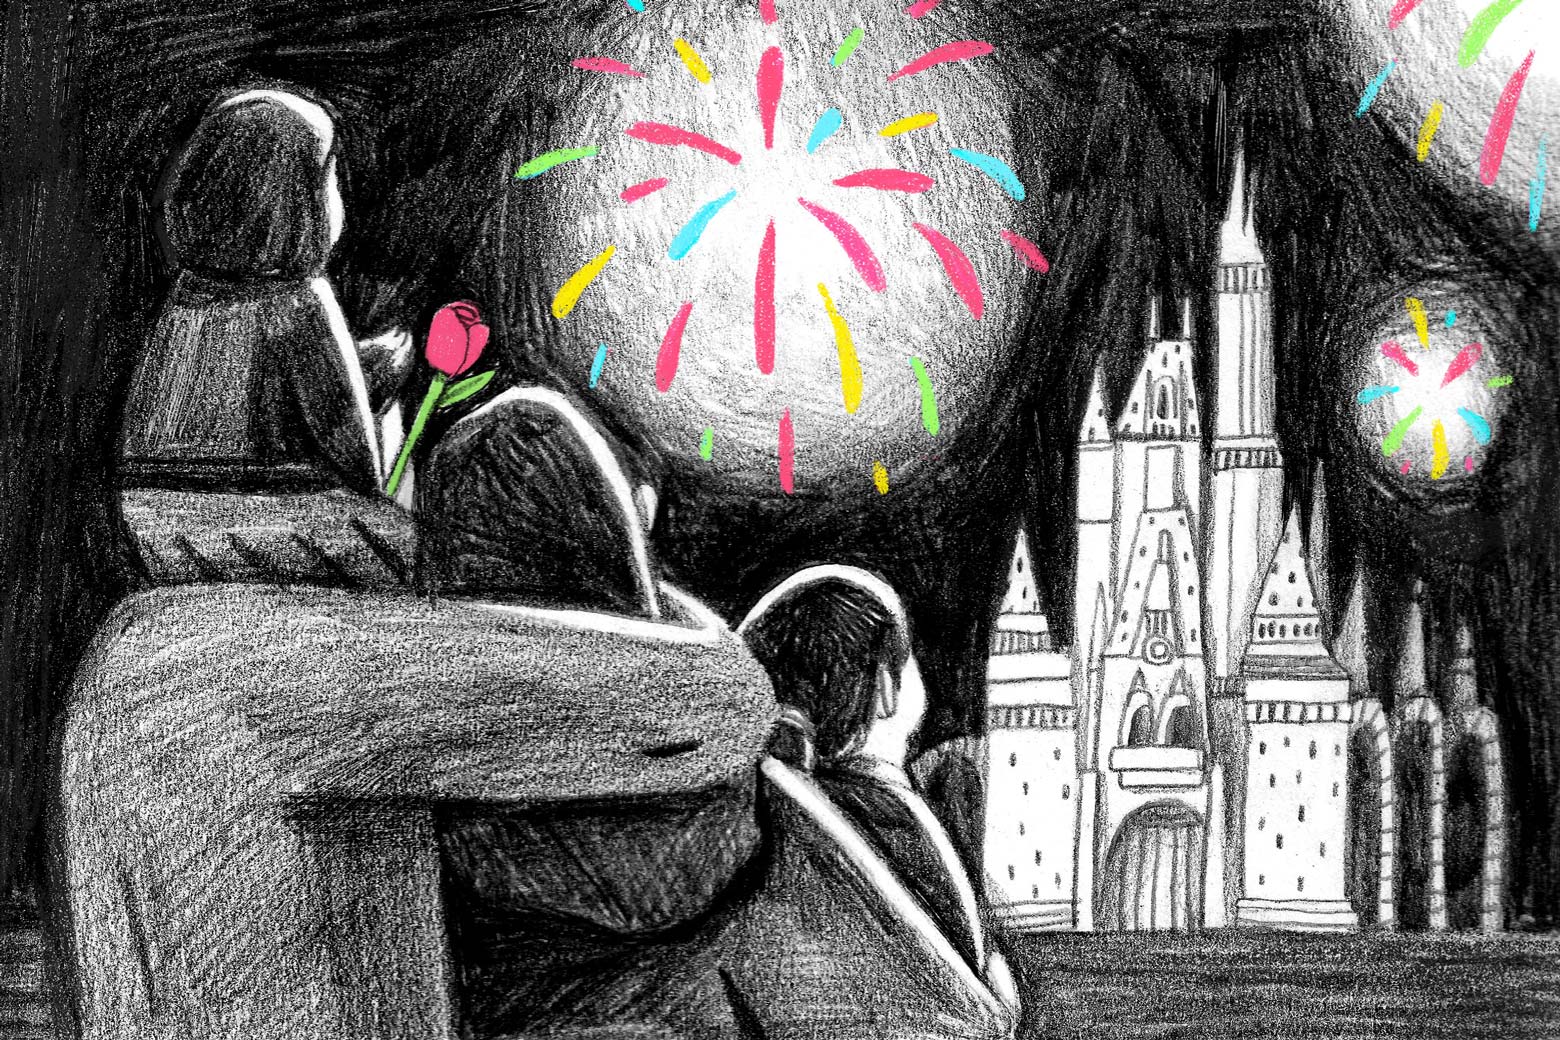 Mother, father, and two children holding a flower looking at fireworks over Cinderella Castle at Disney World.